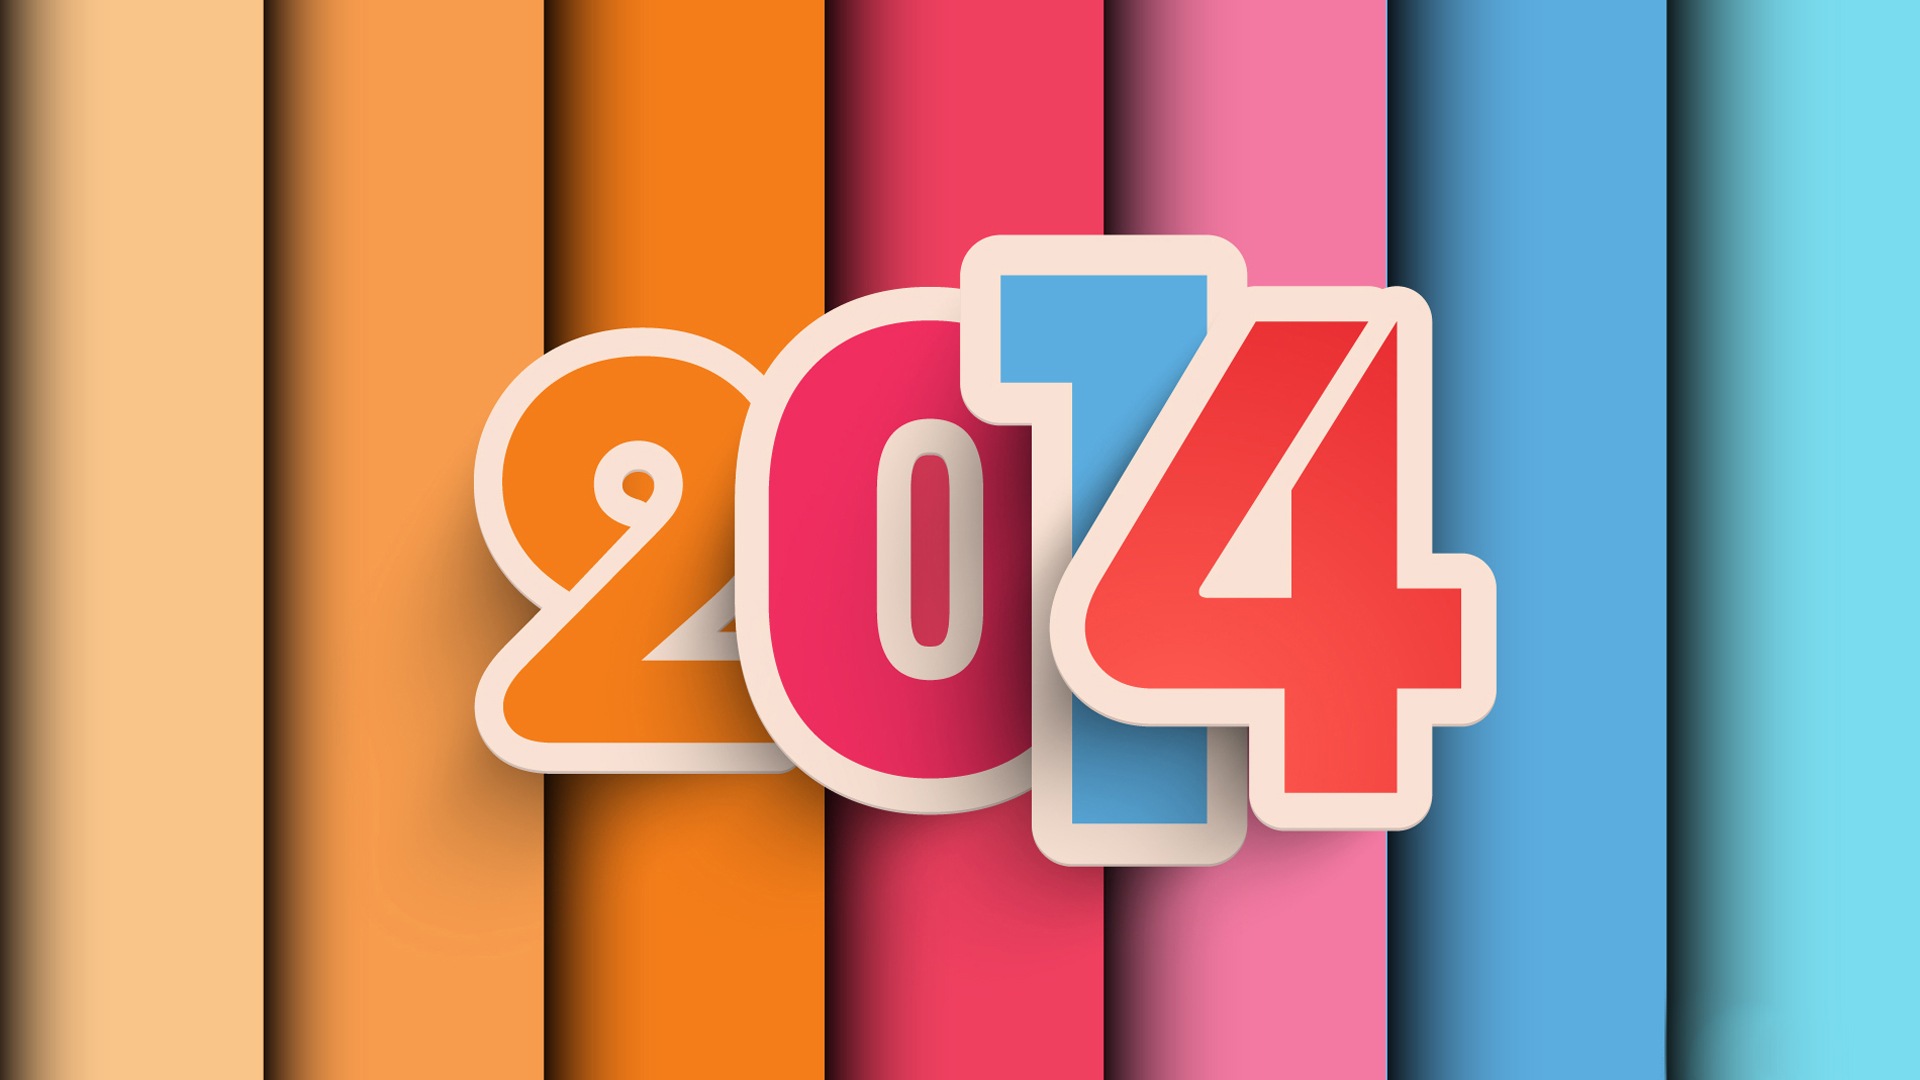 2014 New Year Theme HD Wallpapers (1) #9 - 1920x1080